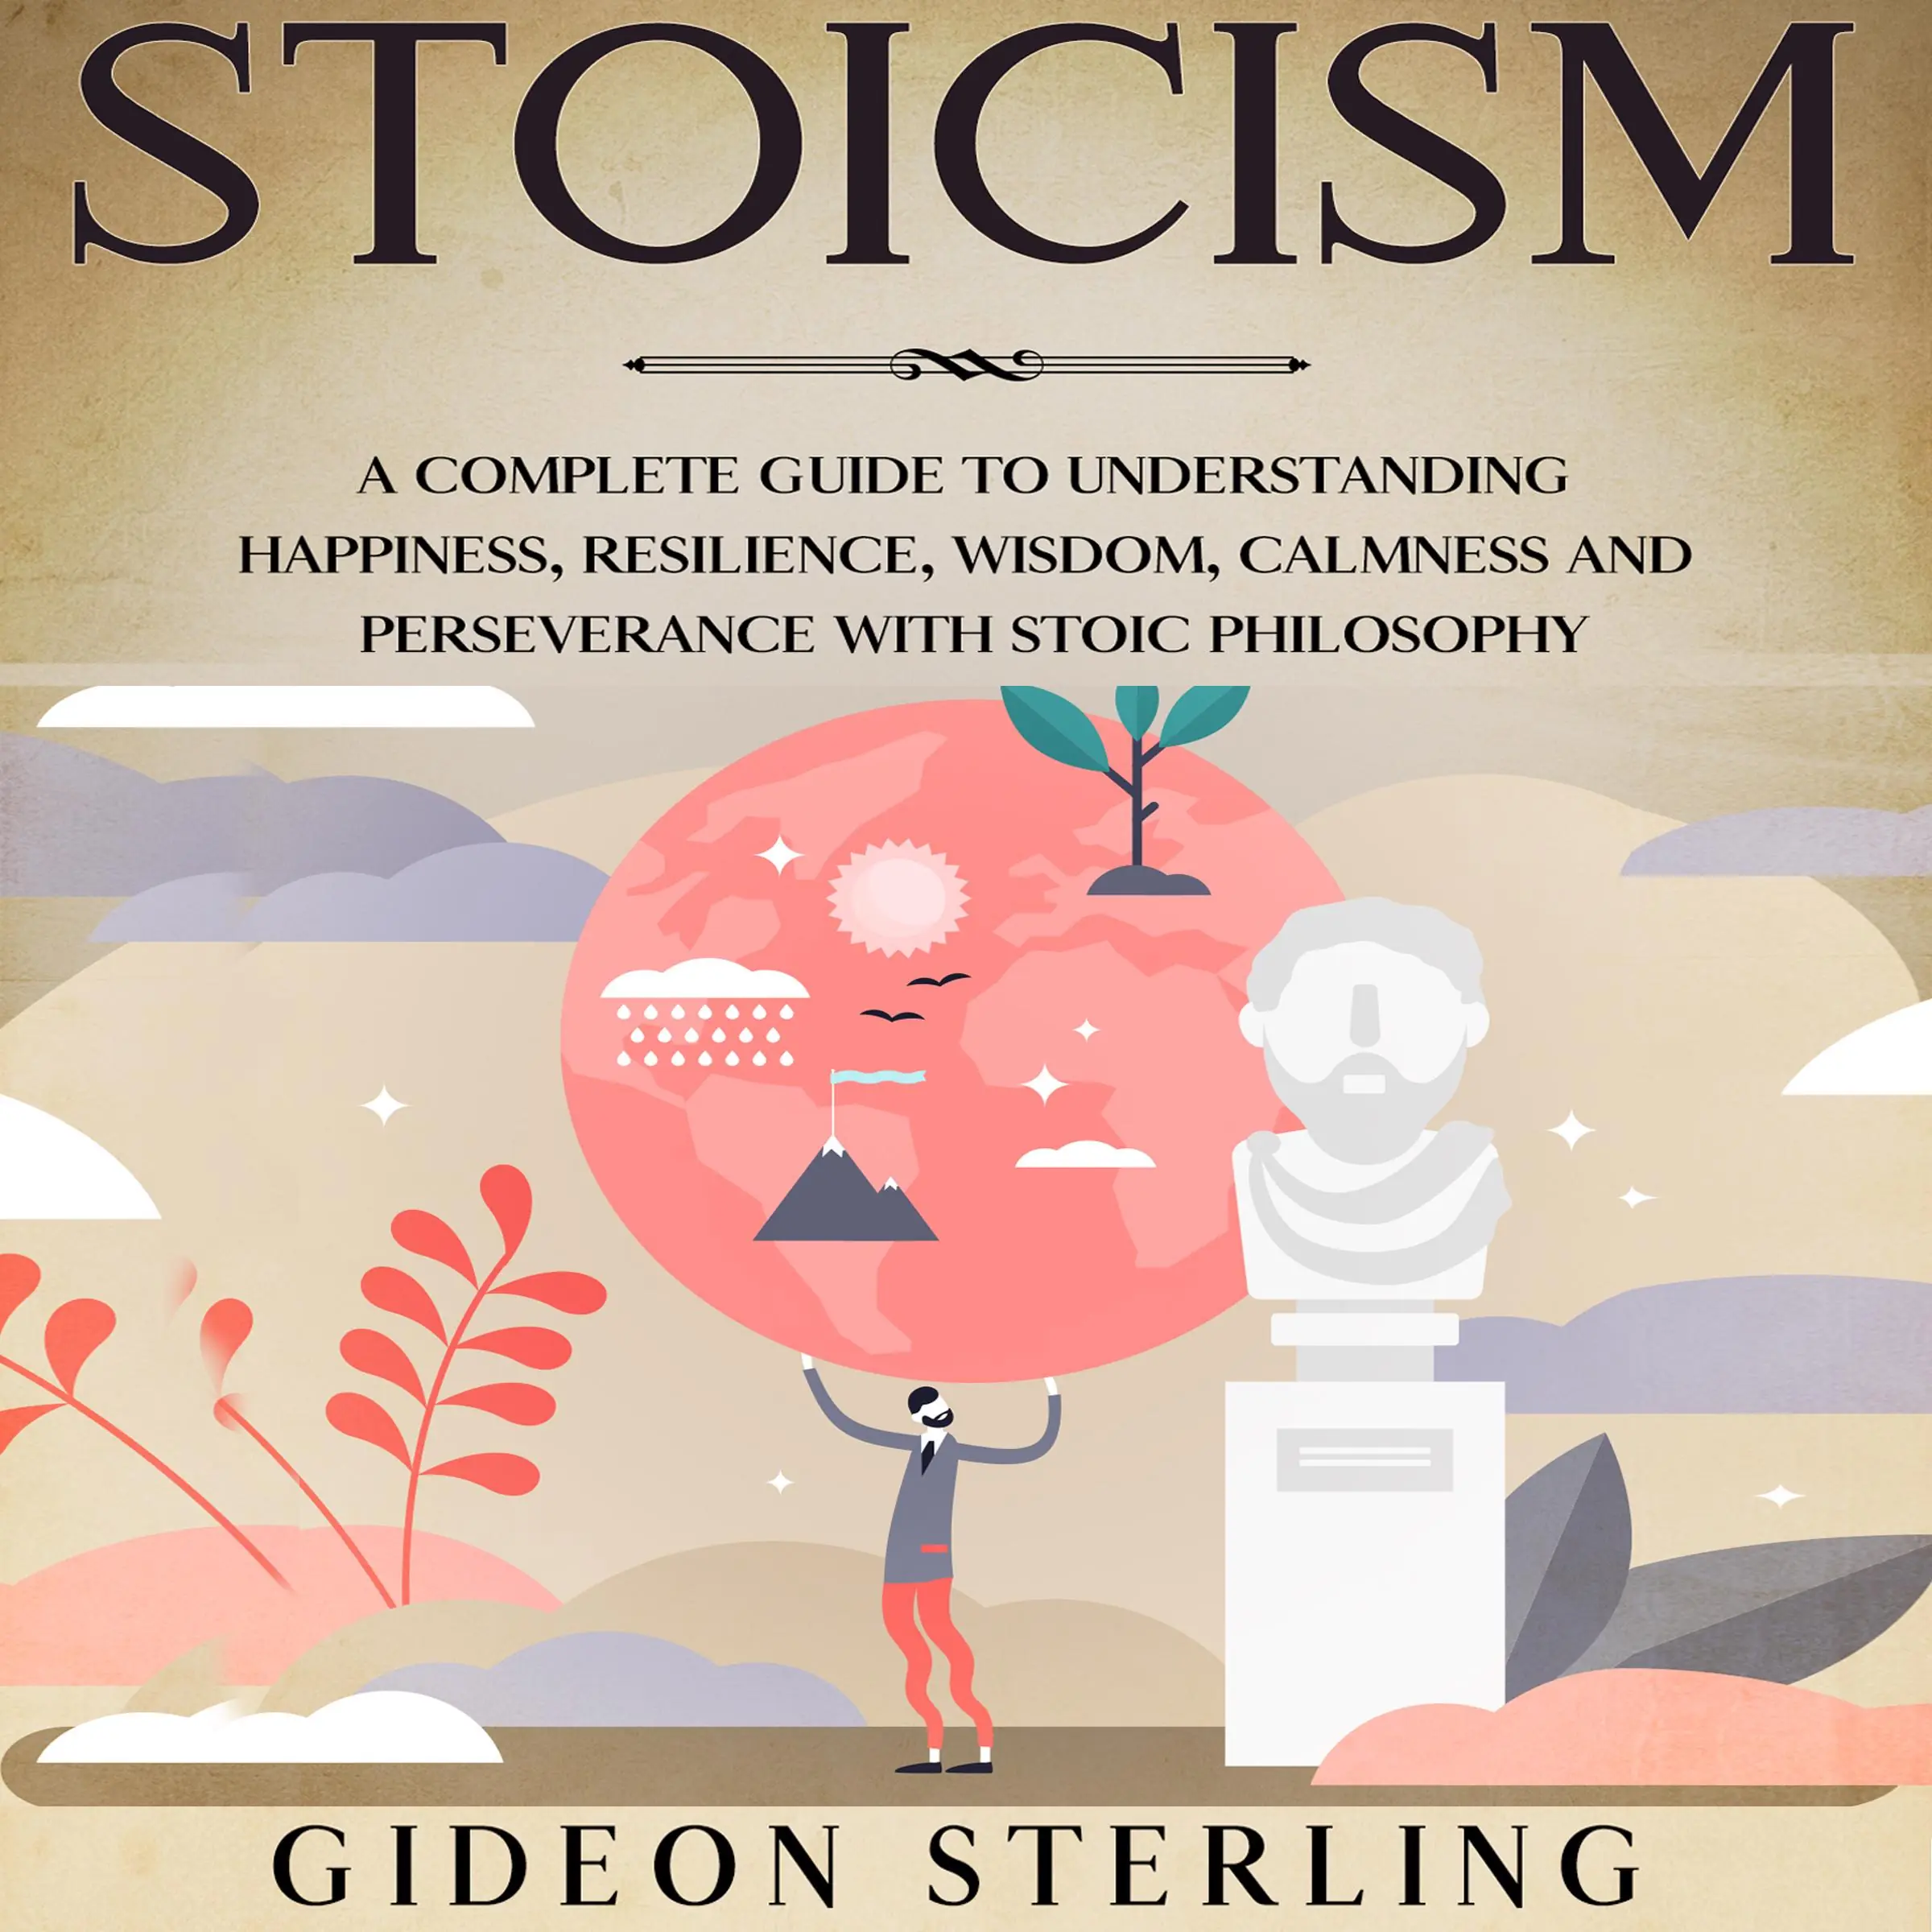 Stoicism: A Complete Guide to Understanding Happiness, Resilience, Wisdom, Calmness and Perseverance with Stoic Philosophy Audiobook by Gideon Sterling